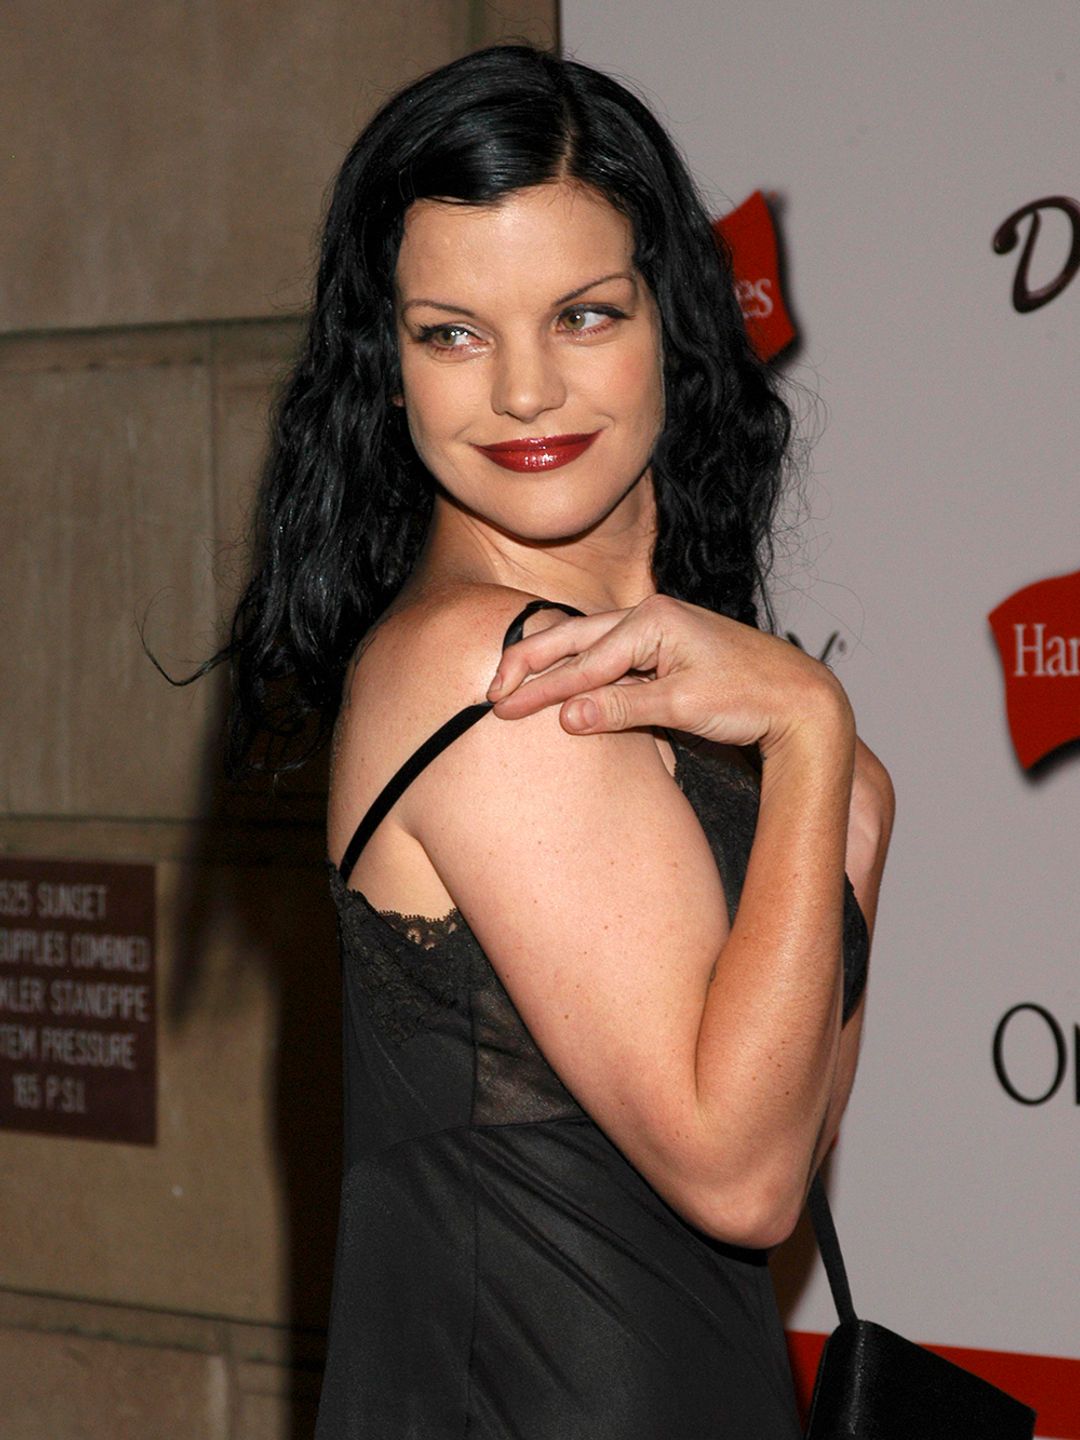 Pauley Perrette at an Emmys party in 2006